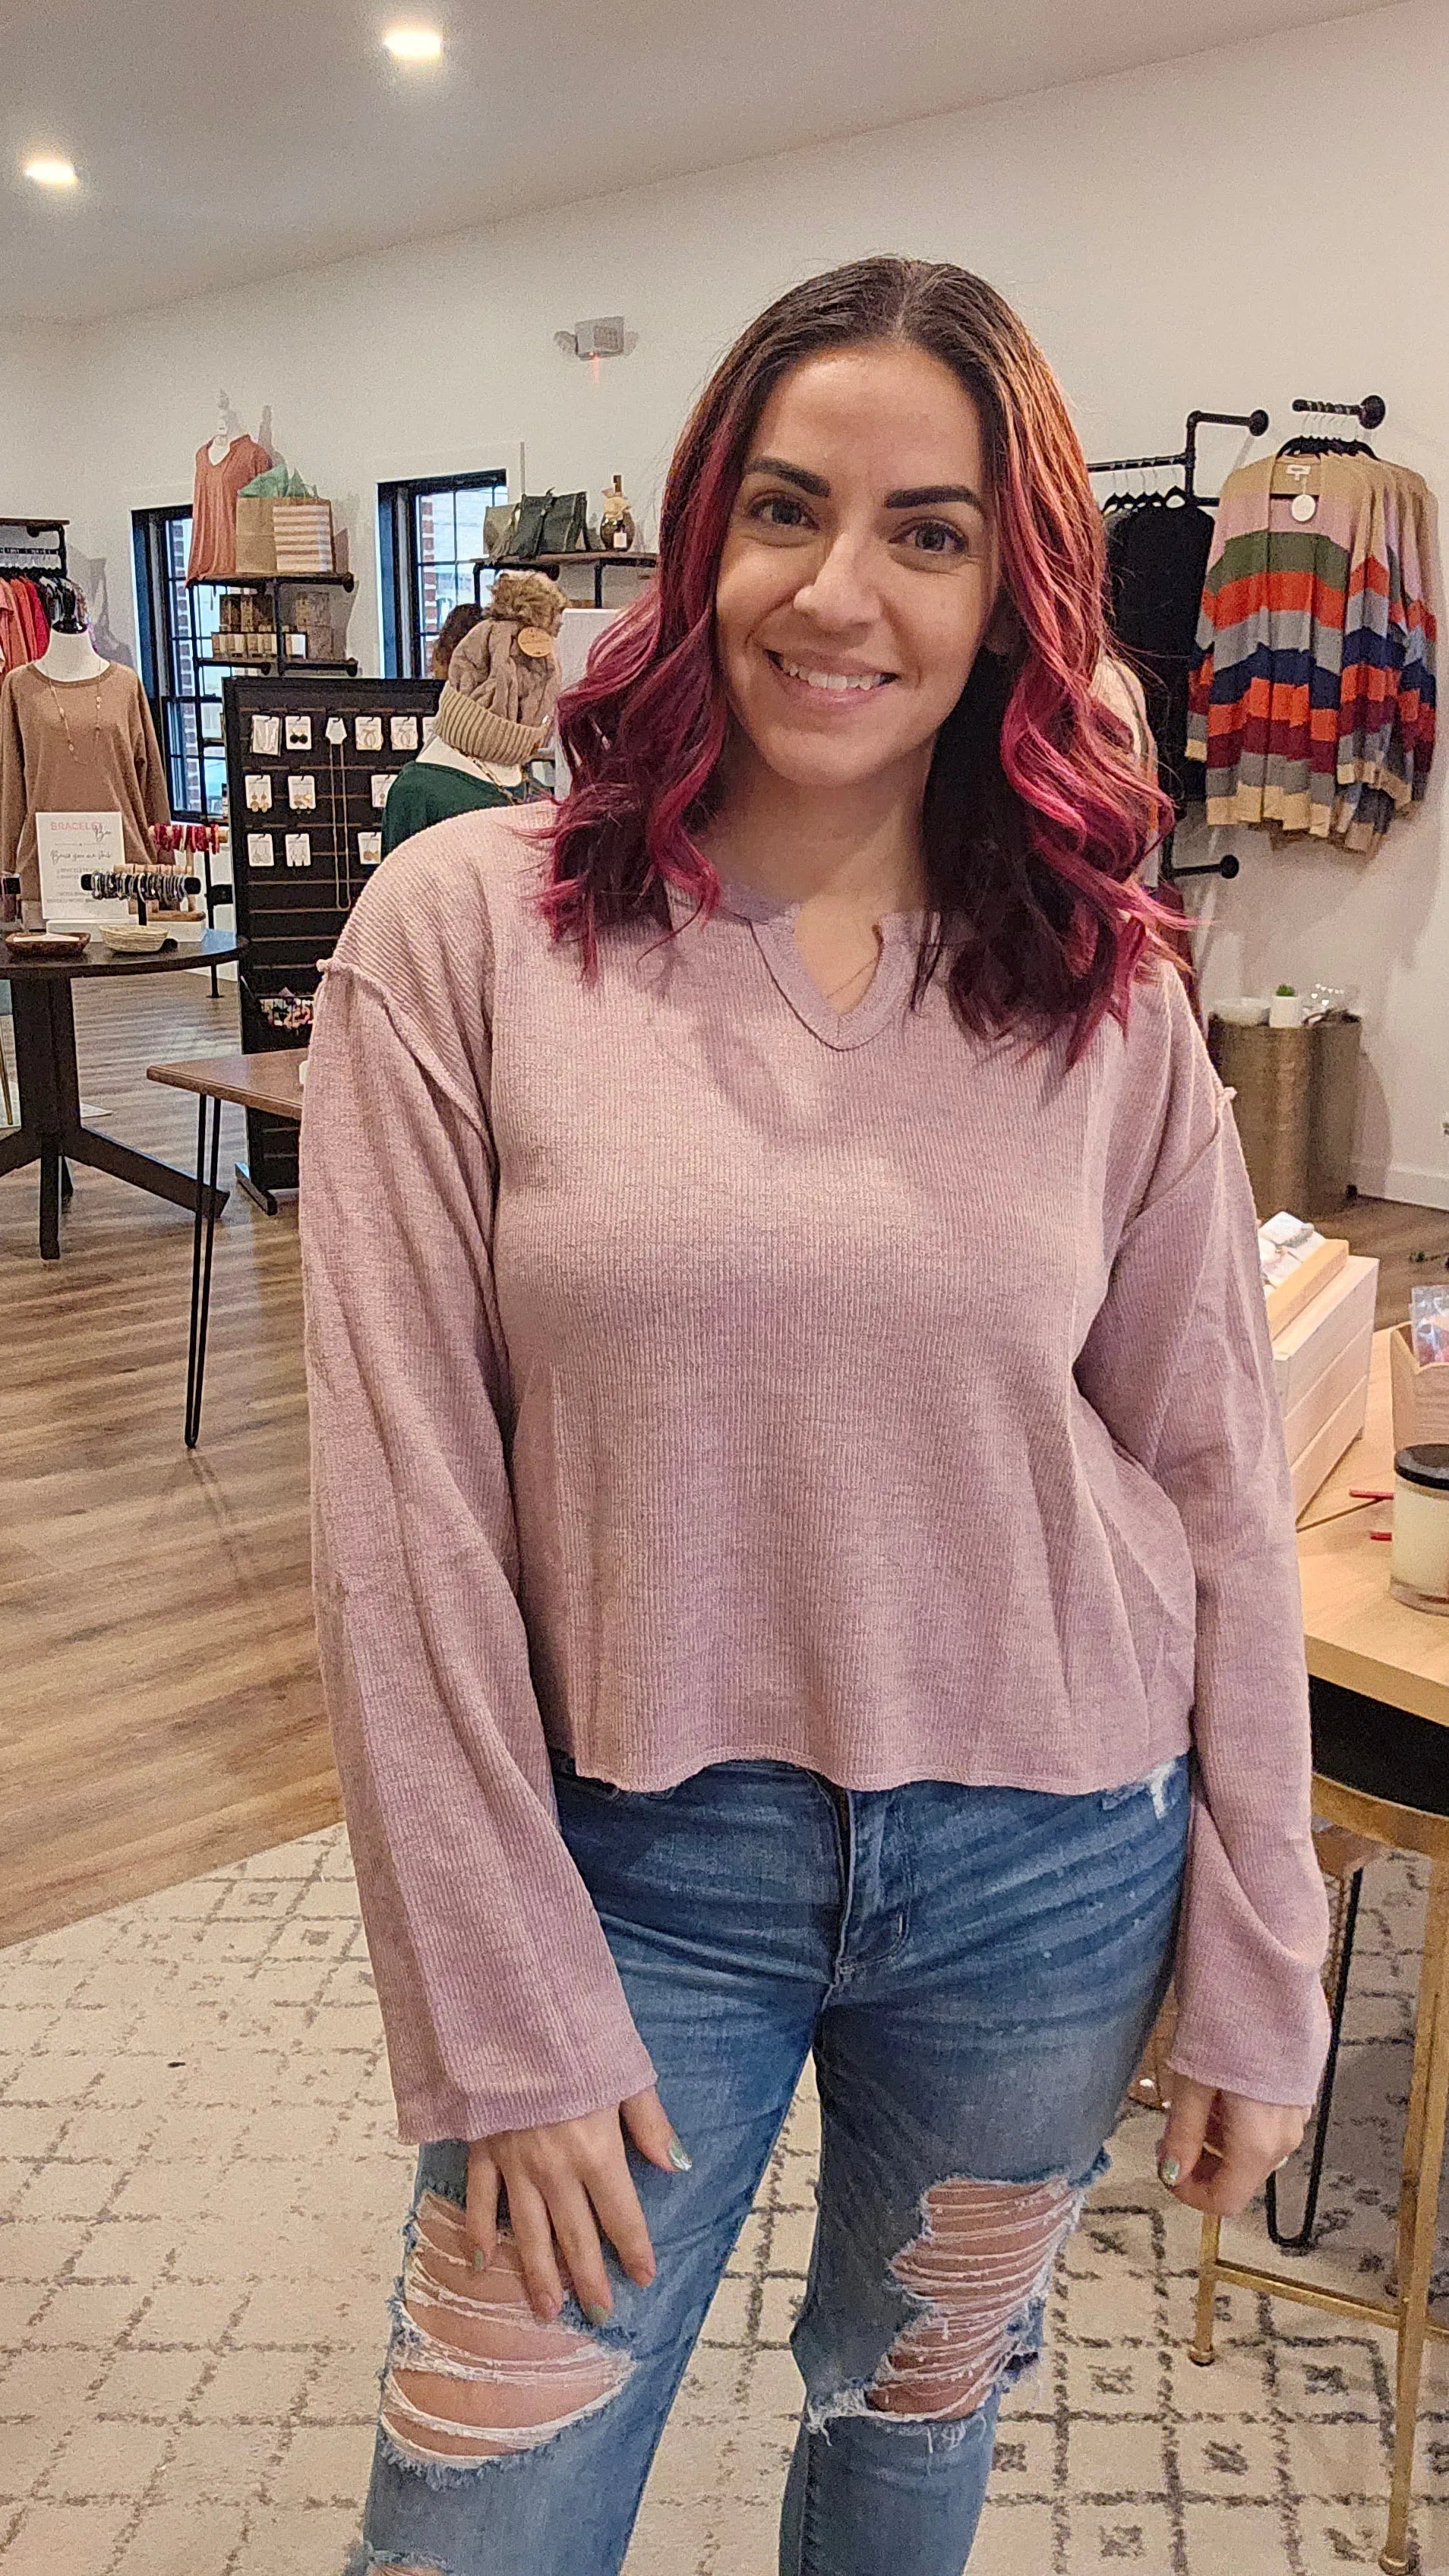 Shop Kayte V-Notch Top-Shirts & Tops at Ruby Joy Boutique, a Women's Clothing Store in Pickerington, Ohio